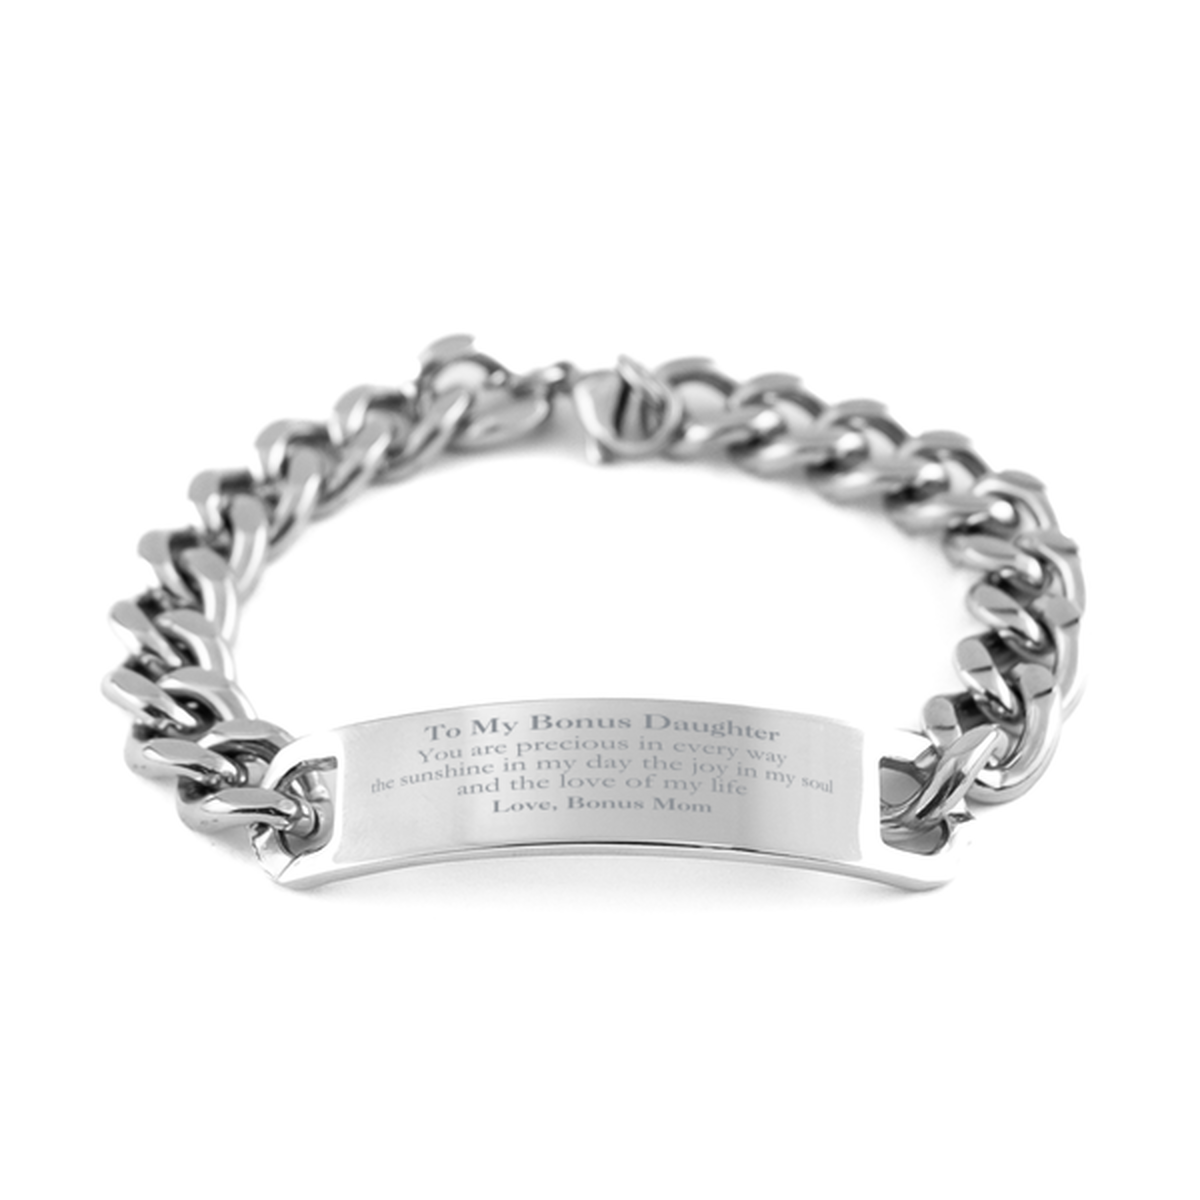 Graduation Gifts for Bonus Daughter Cuban Chain Stainless Steel Bracelet Present from Bonus Mom, Christmas Bonus Daughter Birthday Gifts Bonus Daughter You are precious in every way the sunshine in my day. Love, Bonus Mom